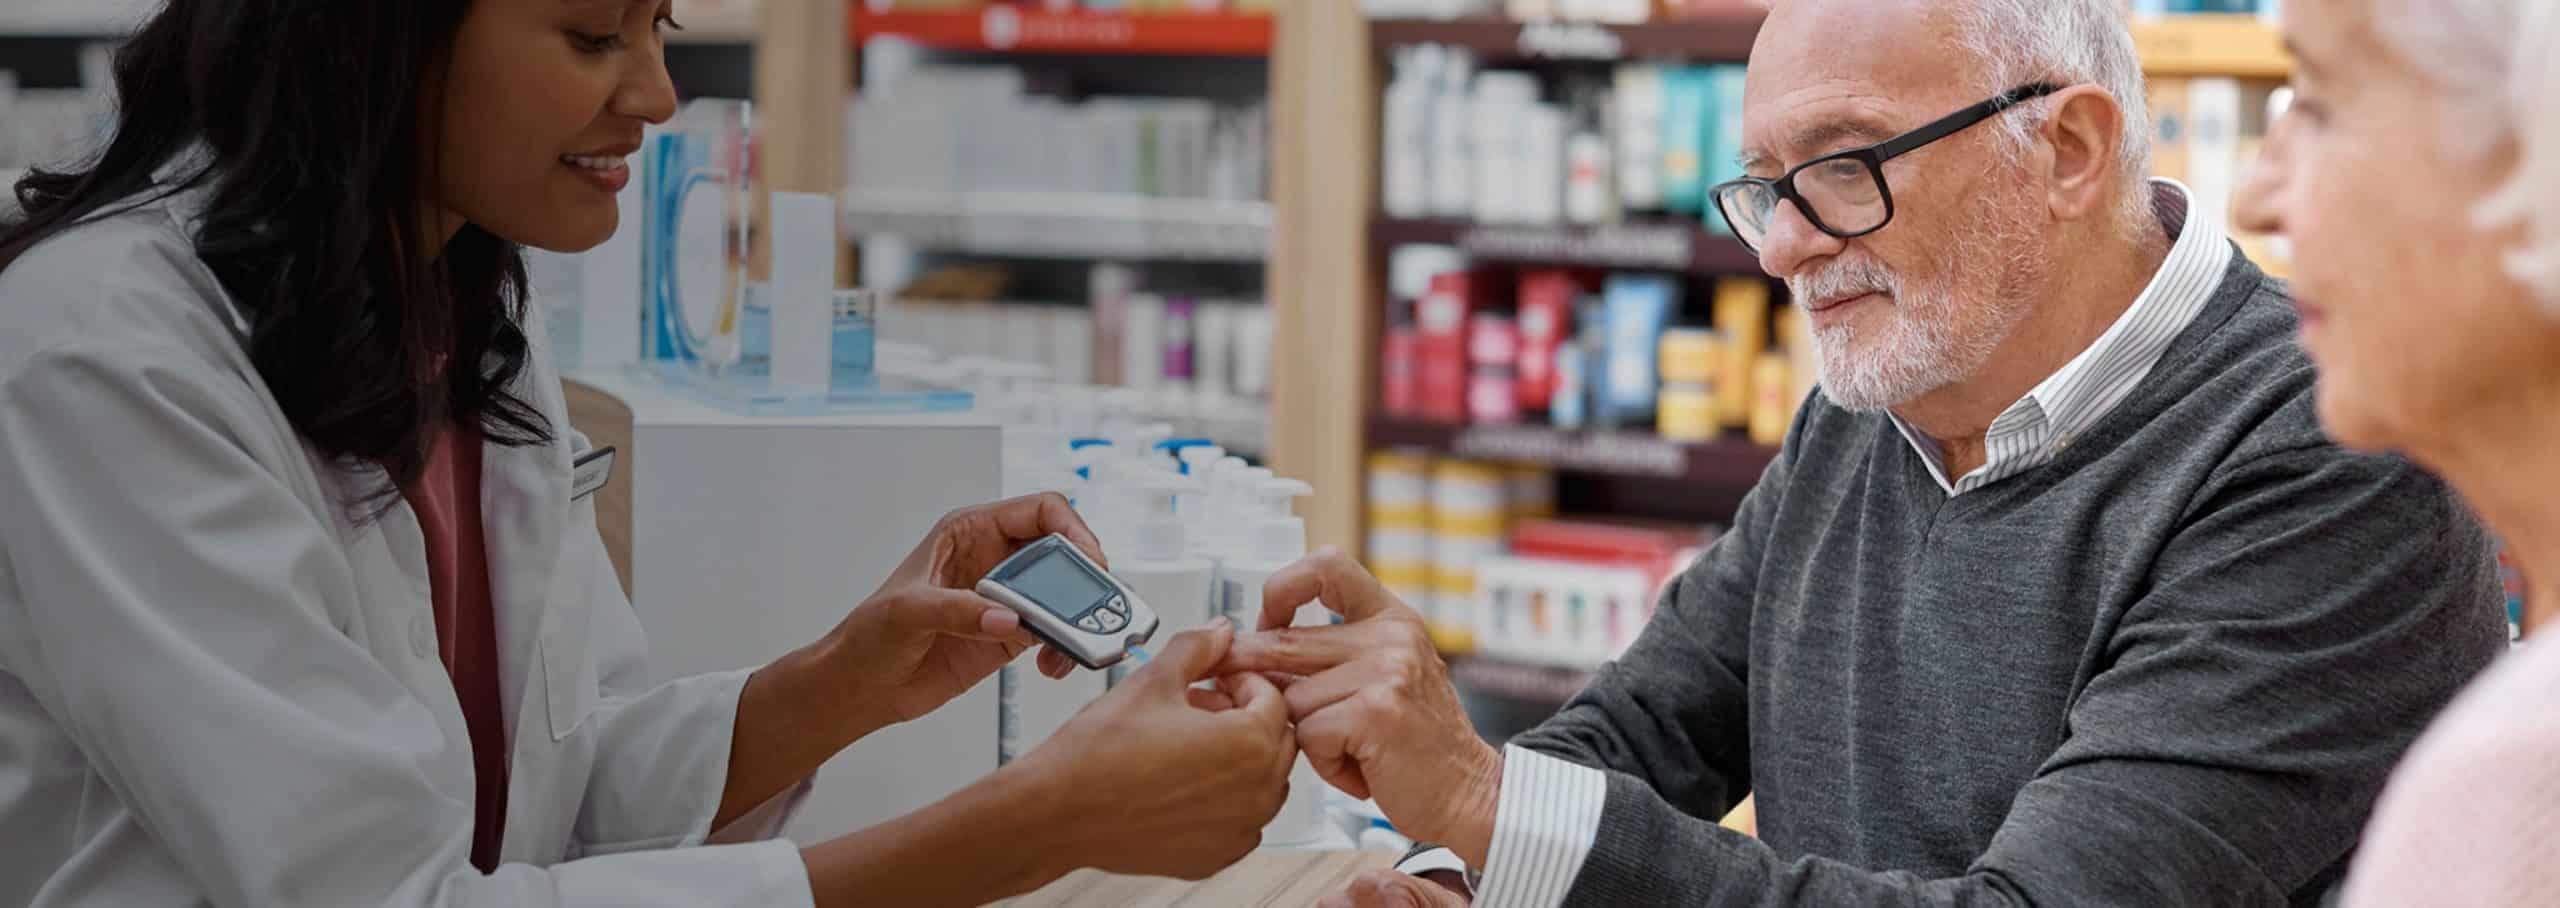 Female pharmacist showing an elderly male customer how to use a glucose meter